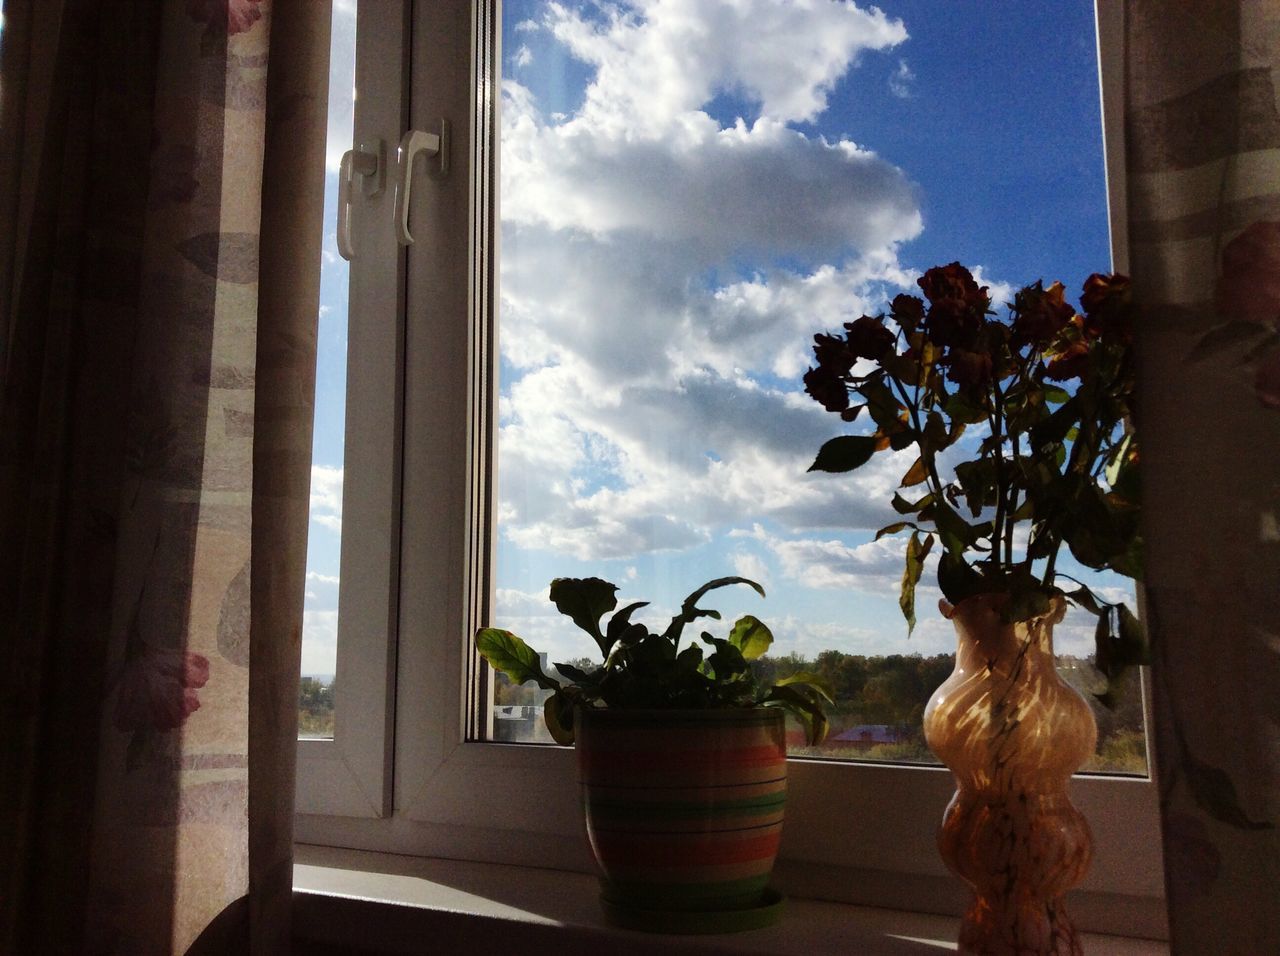 indoors, window, potted plant, flower, home interior, sky, vase, houseplant, plant, window sill, cloud - sky, pot plant, growth, bunch of flowers, day, flower arrangement, no people